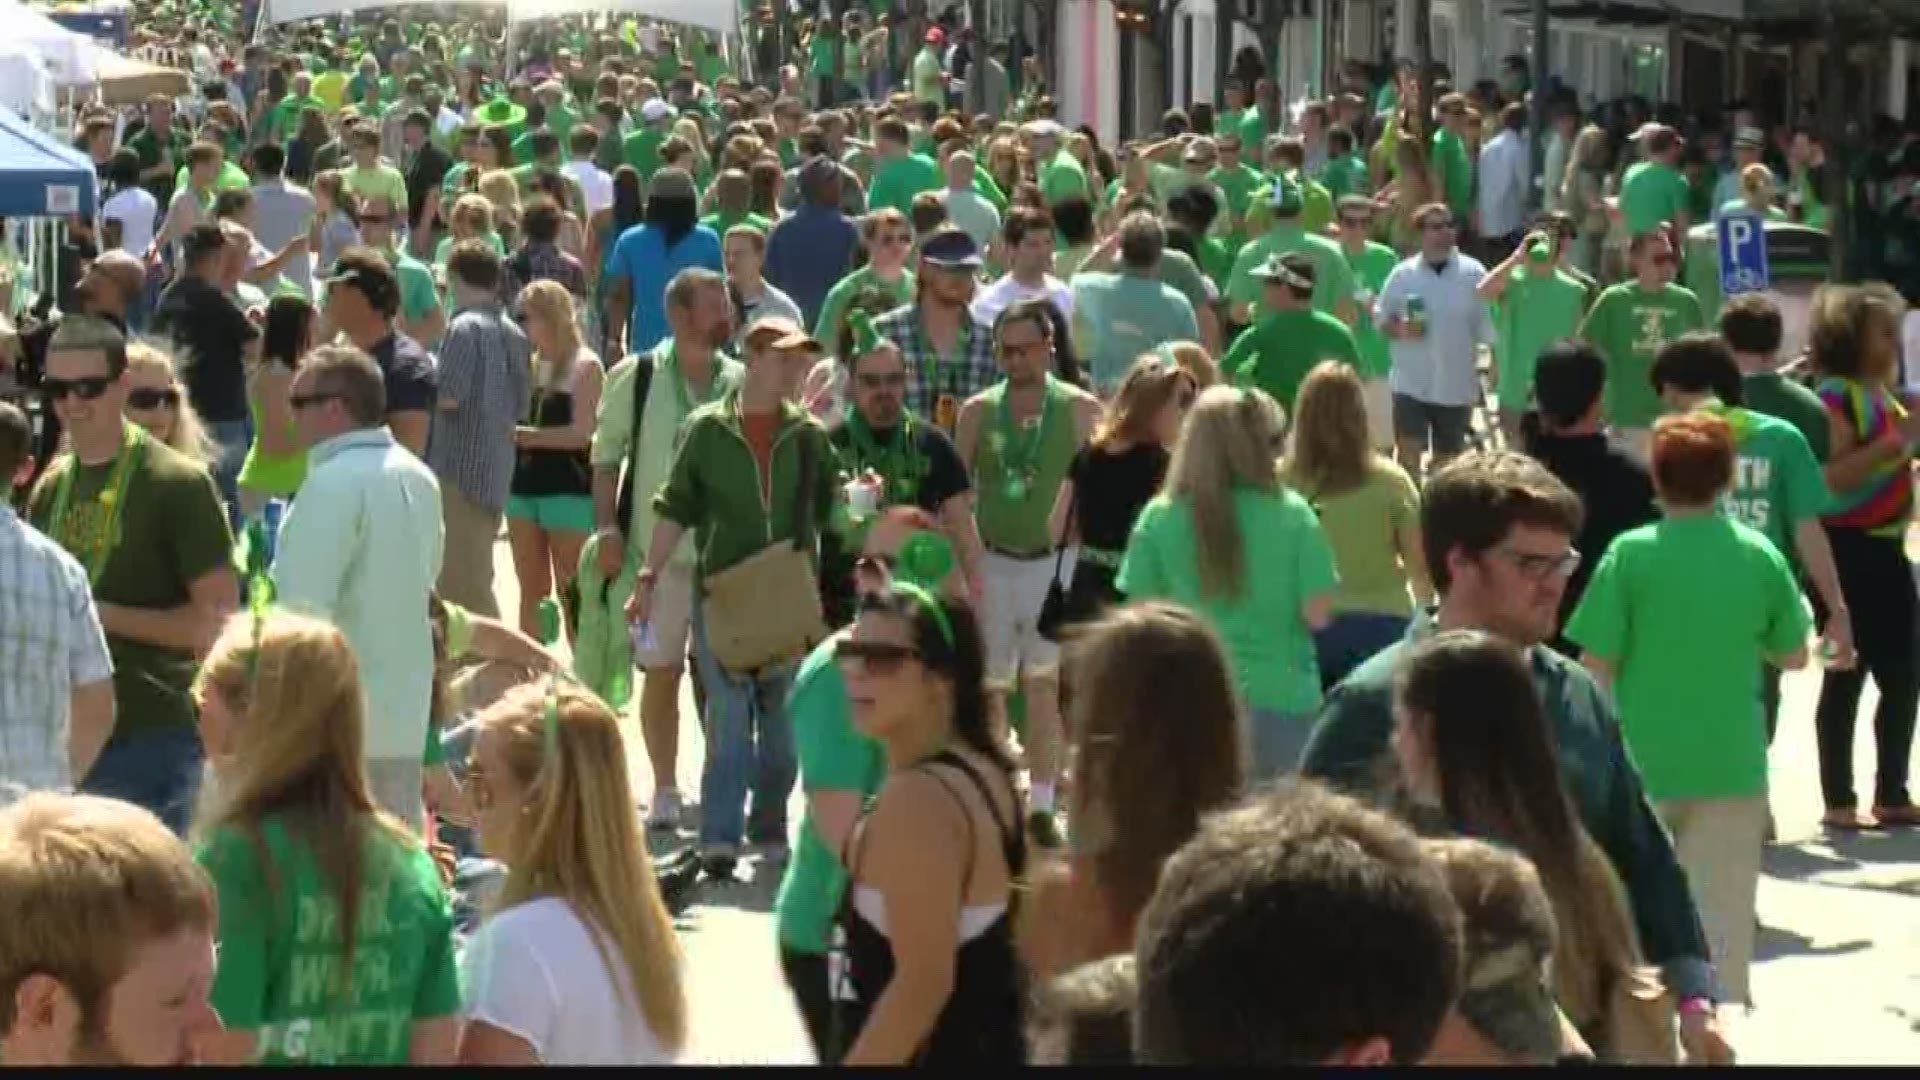 St. Pat's in Five Points is on March 16, 2019.